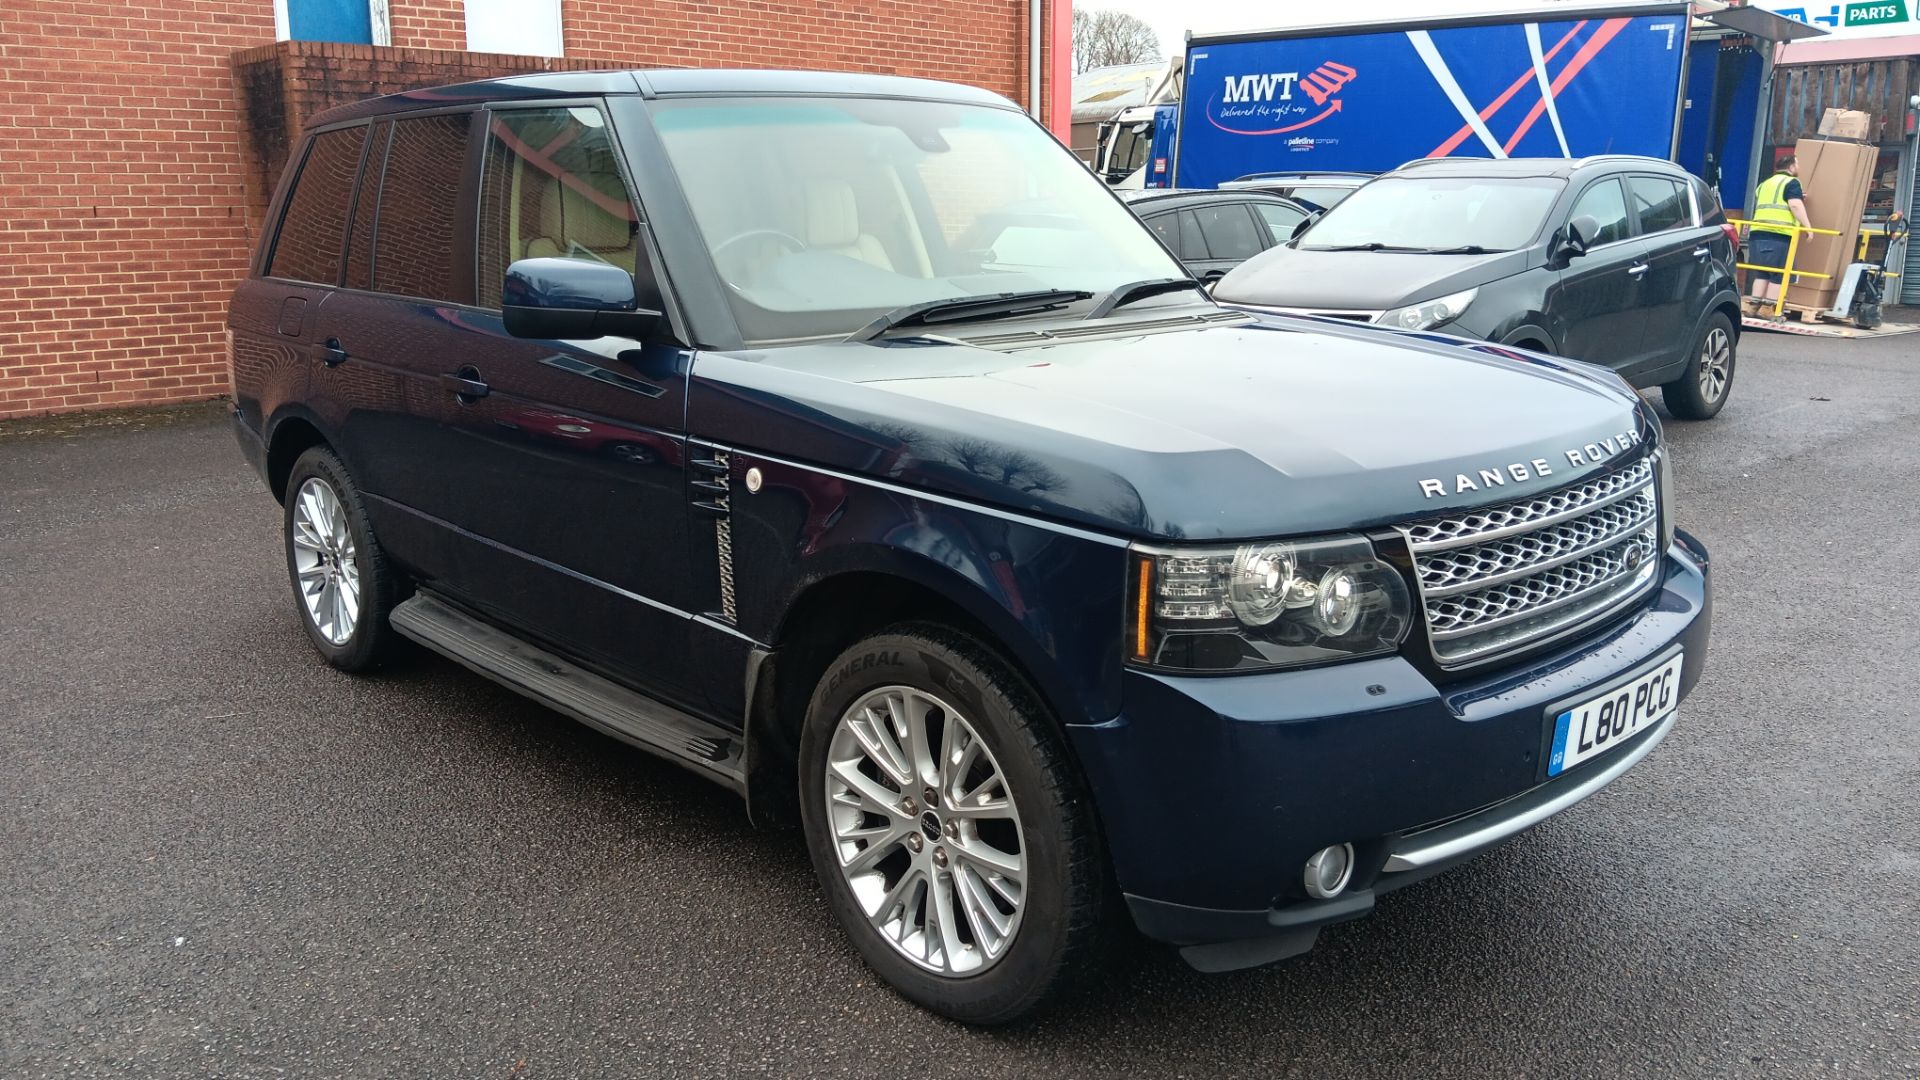 Land Rover Range Rover Special Editions 4.4 TDV8 Westminster 4dr 8 speed Auto, Registration L80 PCG